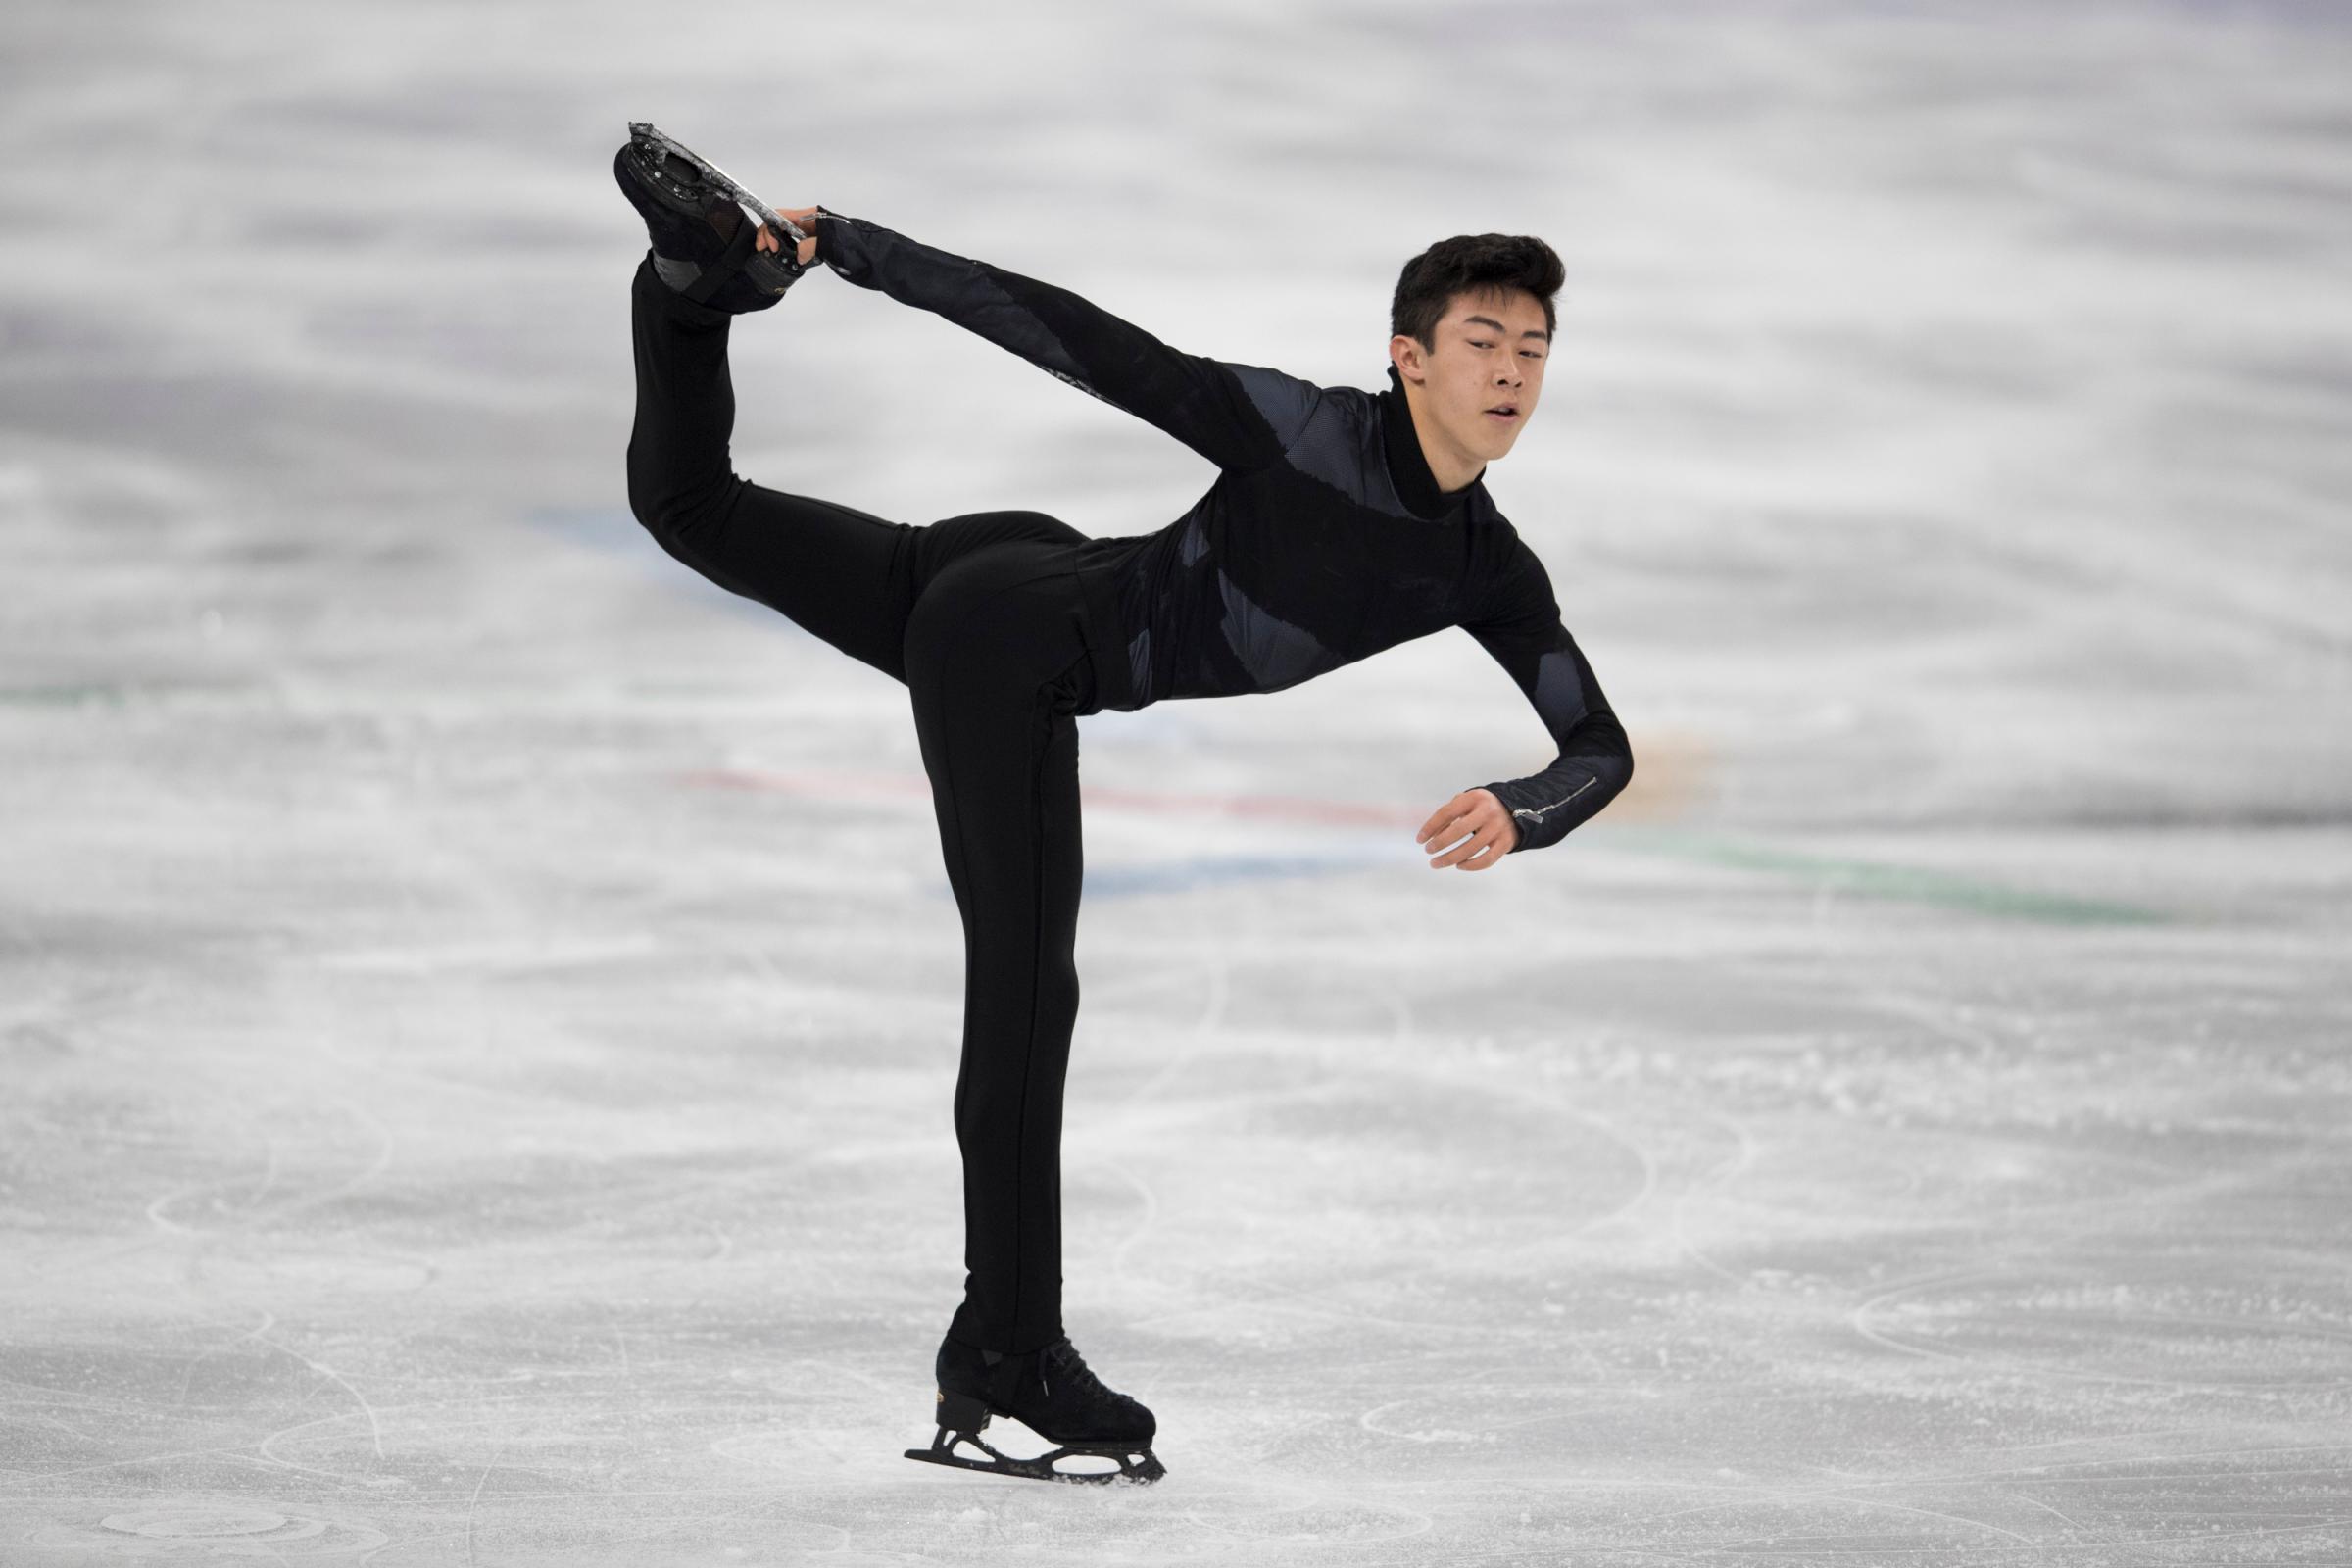 Nathan Chen of the United States competes in the Figure Skating Team Event Men's Single Skating Short Program during the PyeongChang 2018 Winter Olympic Games on Feb. 9, 2018 in Gangneung, South Korea.